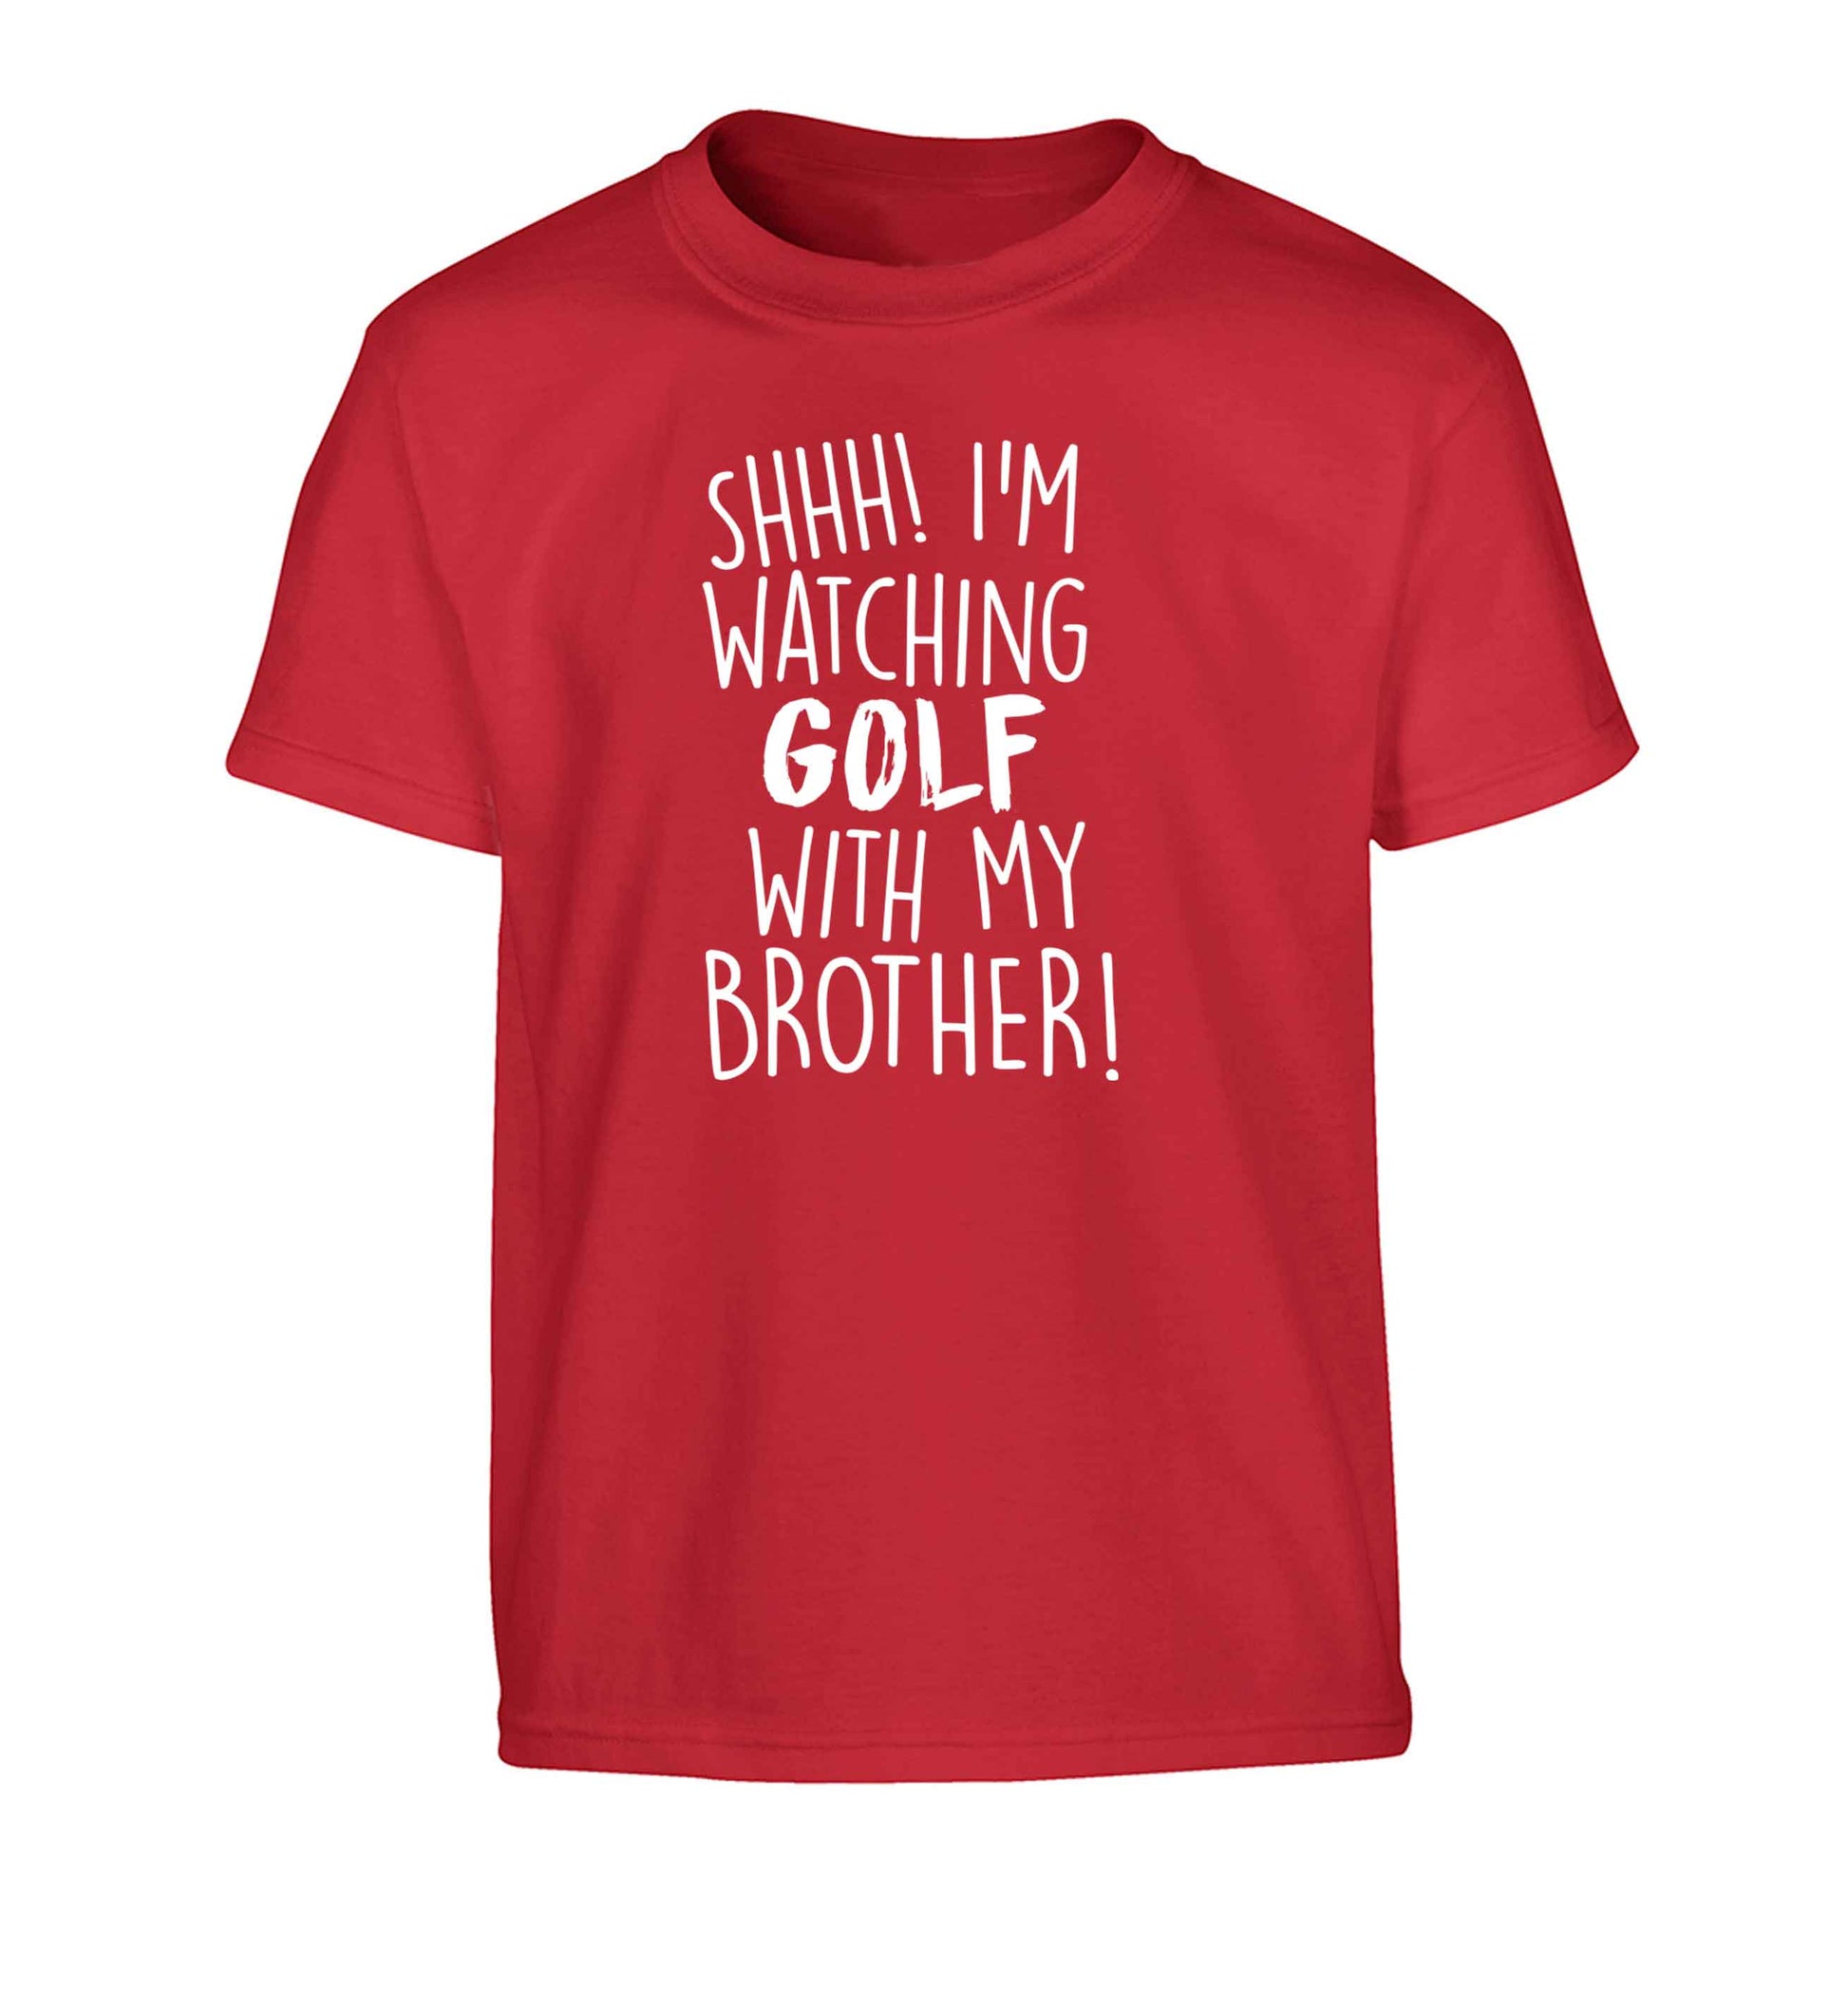 Shh I'm watching golf with my brother Children's red Tshirt 12-13 Years